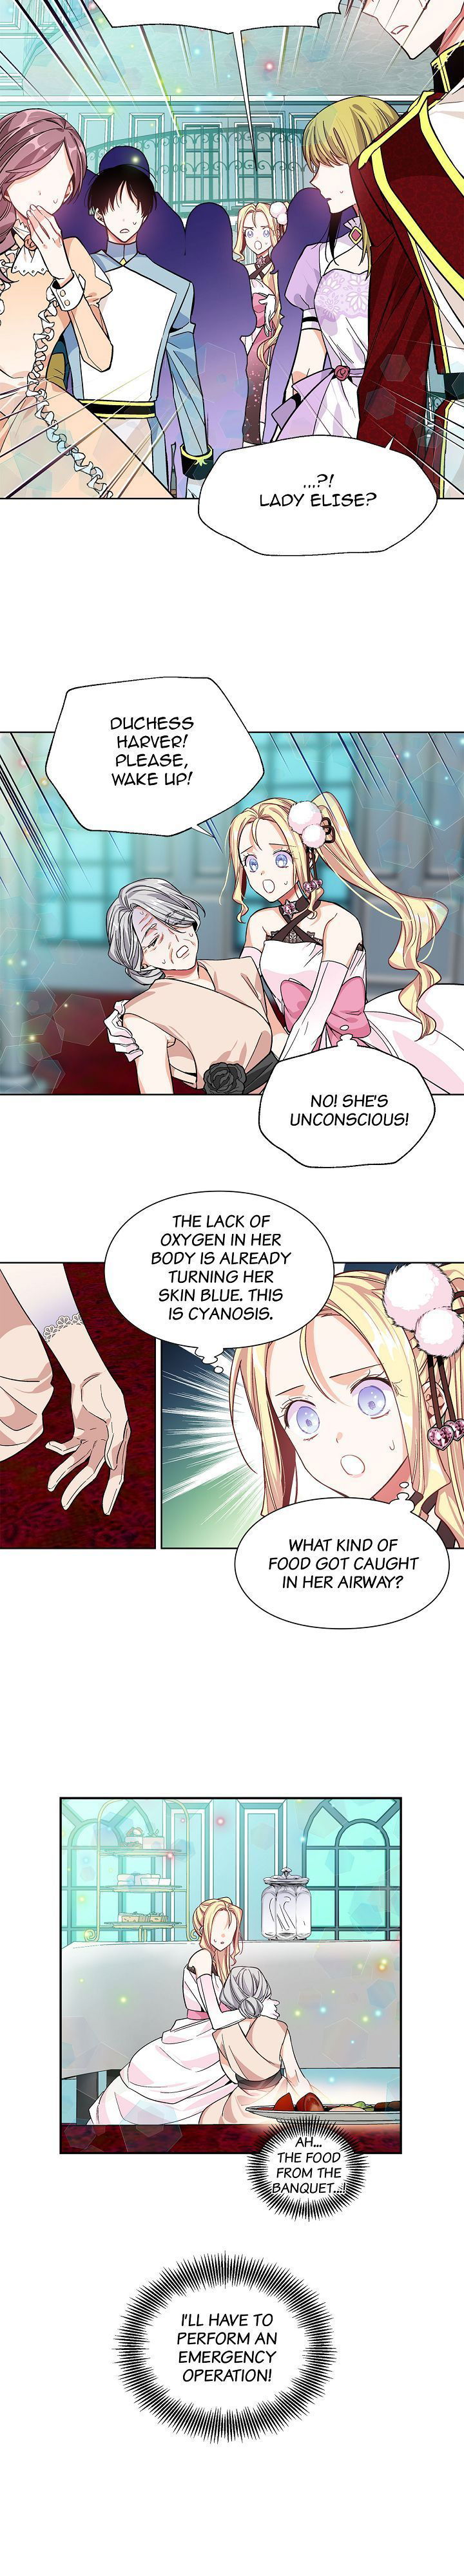 Doctor Elise: The Royal Lady with the Lamp Chapter 035 page 4